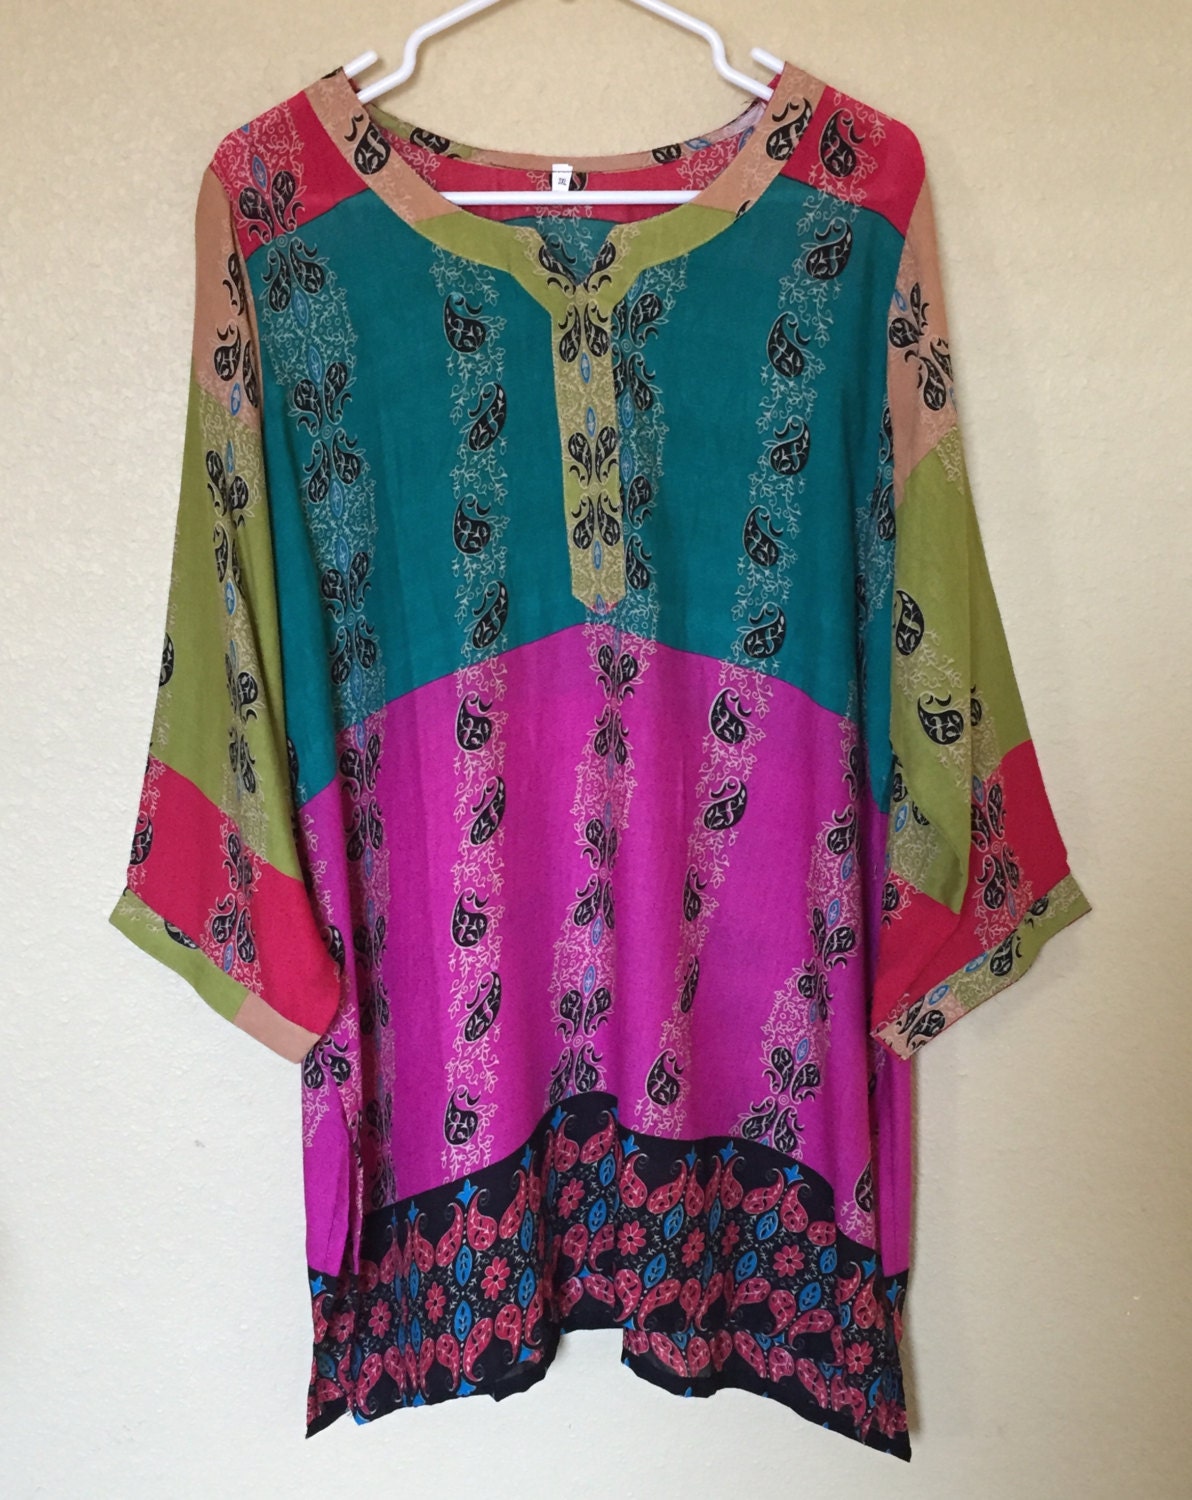 Colorful Paisley Tunic by FuzionJewelry on Etsy